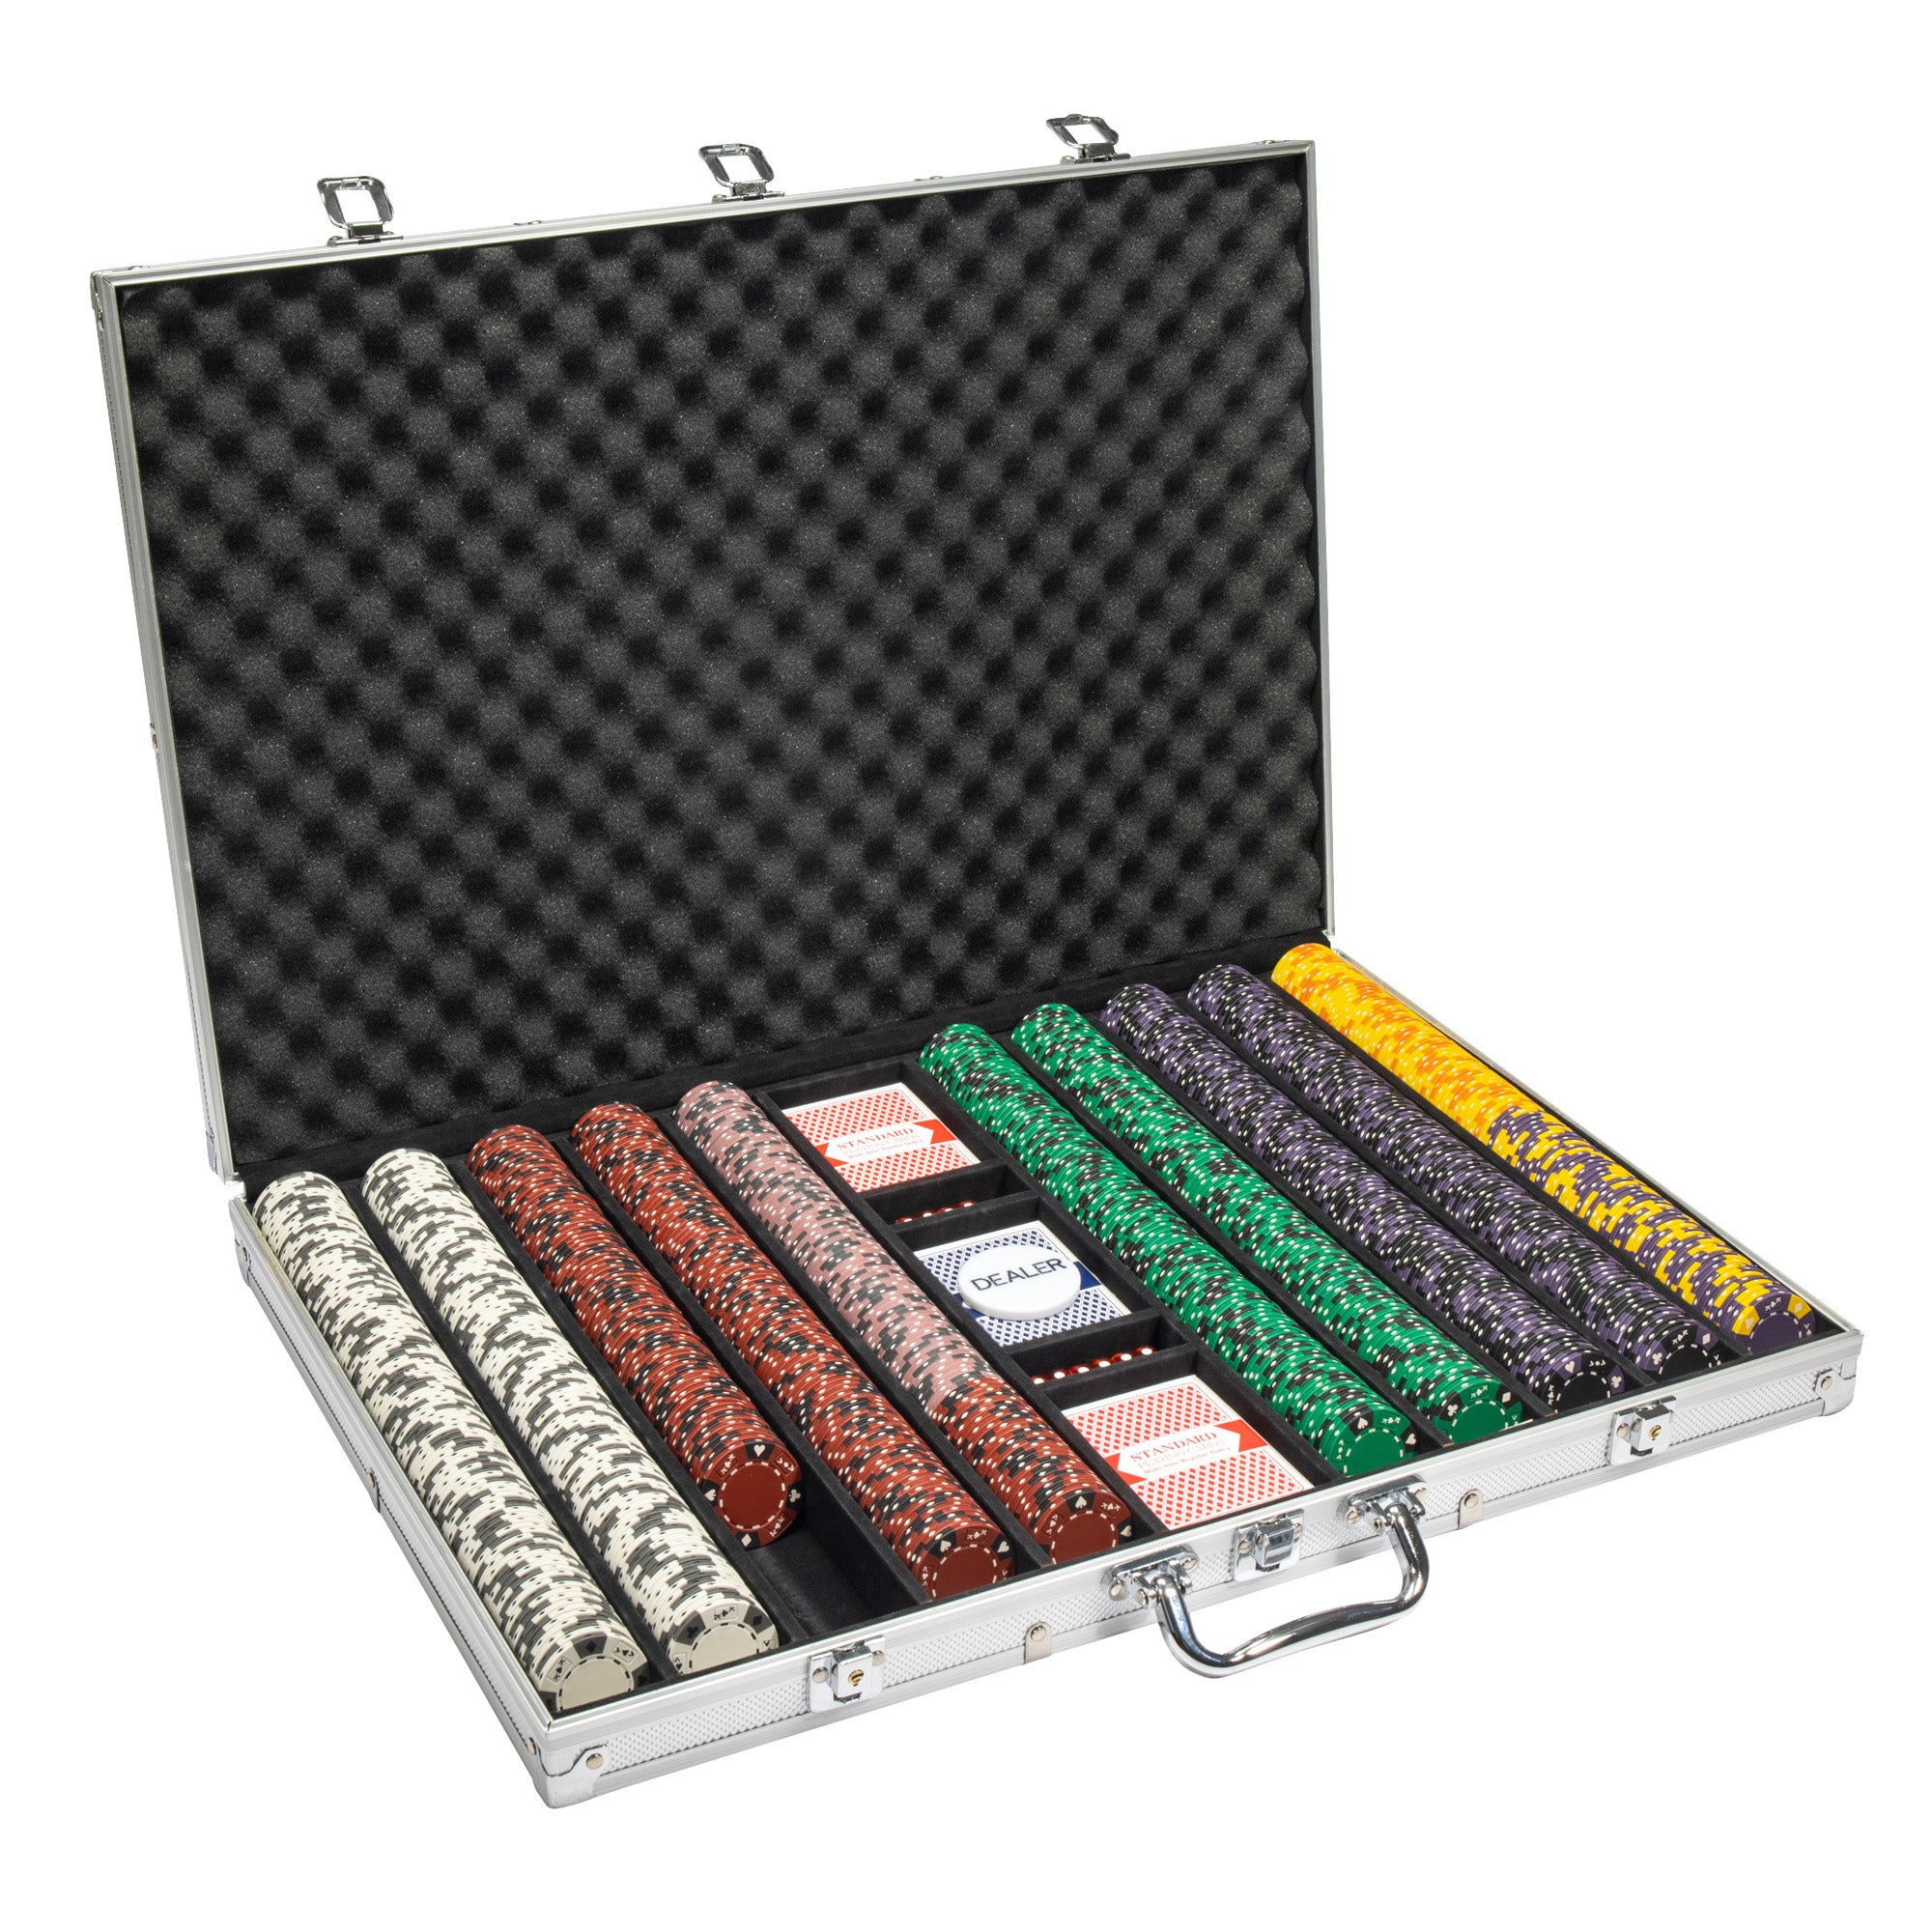 Ace King 14-gram Poker Chip Set in Aluminum Case (1000 Count) - Clay Composite